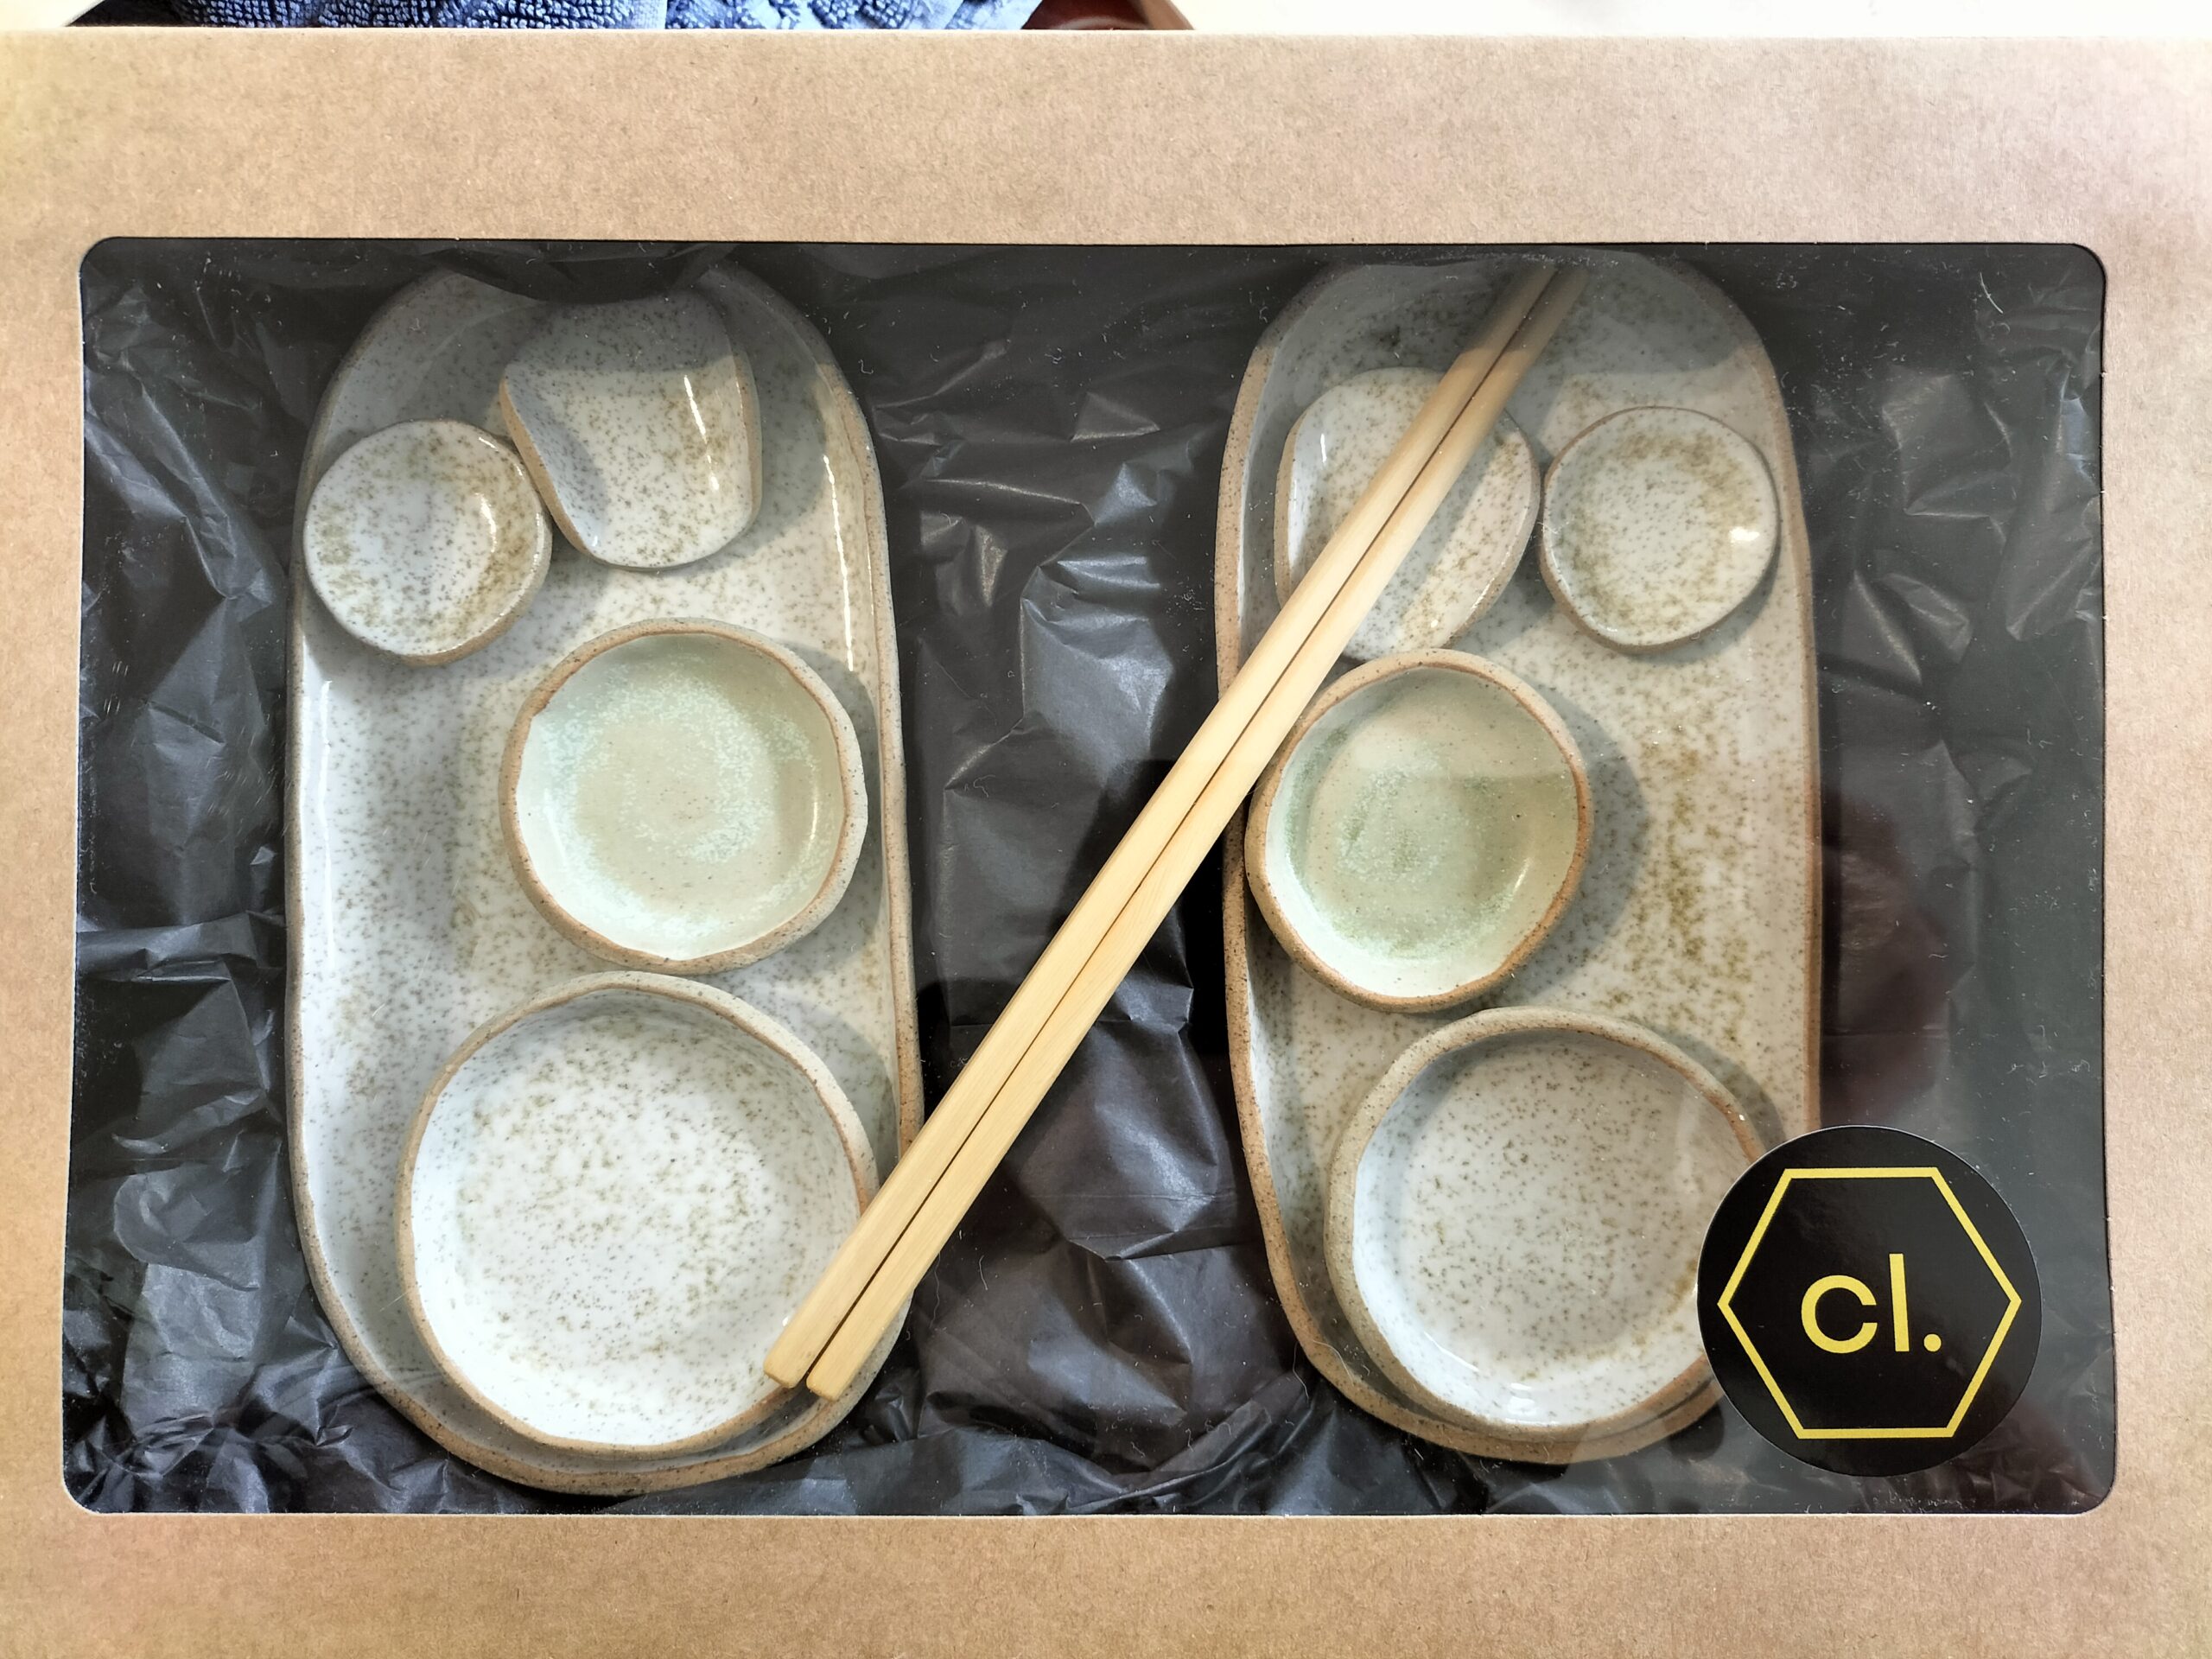 Image shows a sushi table ware set by Christie Lange in her Artist Profile Art Trails Tasmania packed in a cardboard box